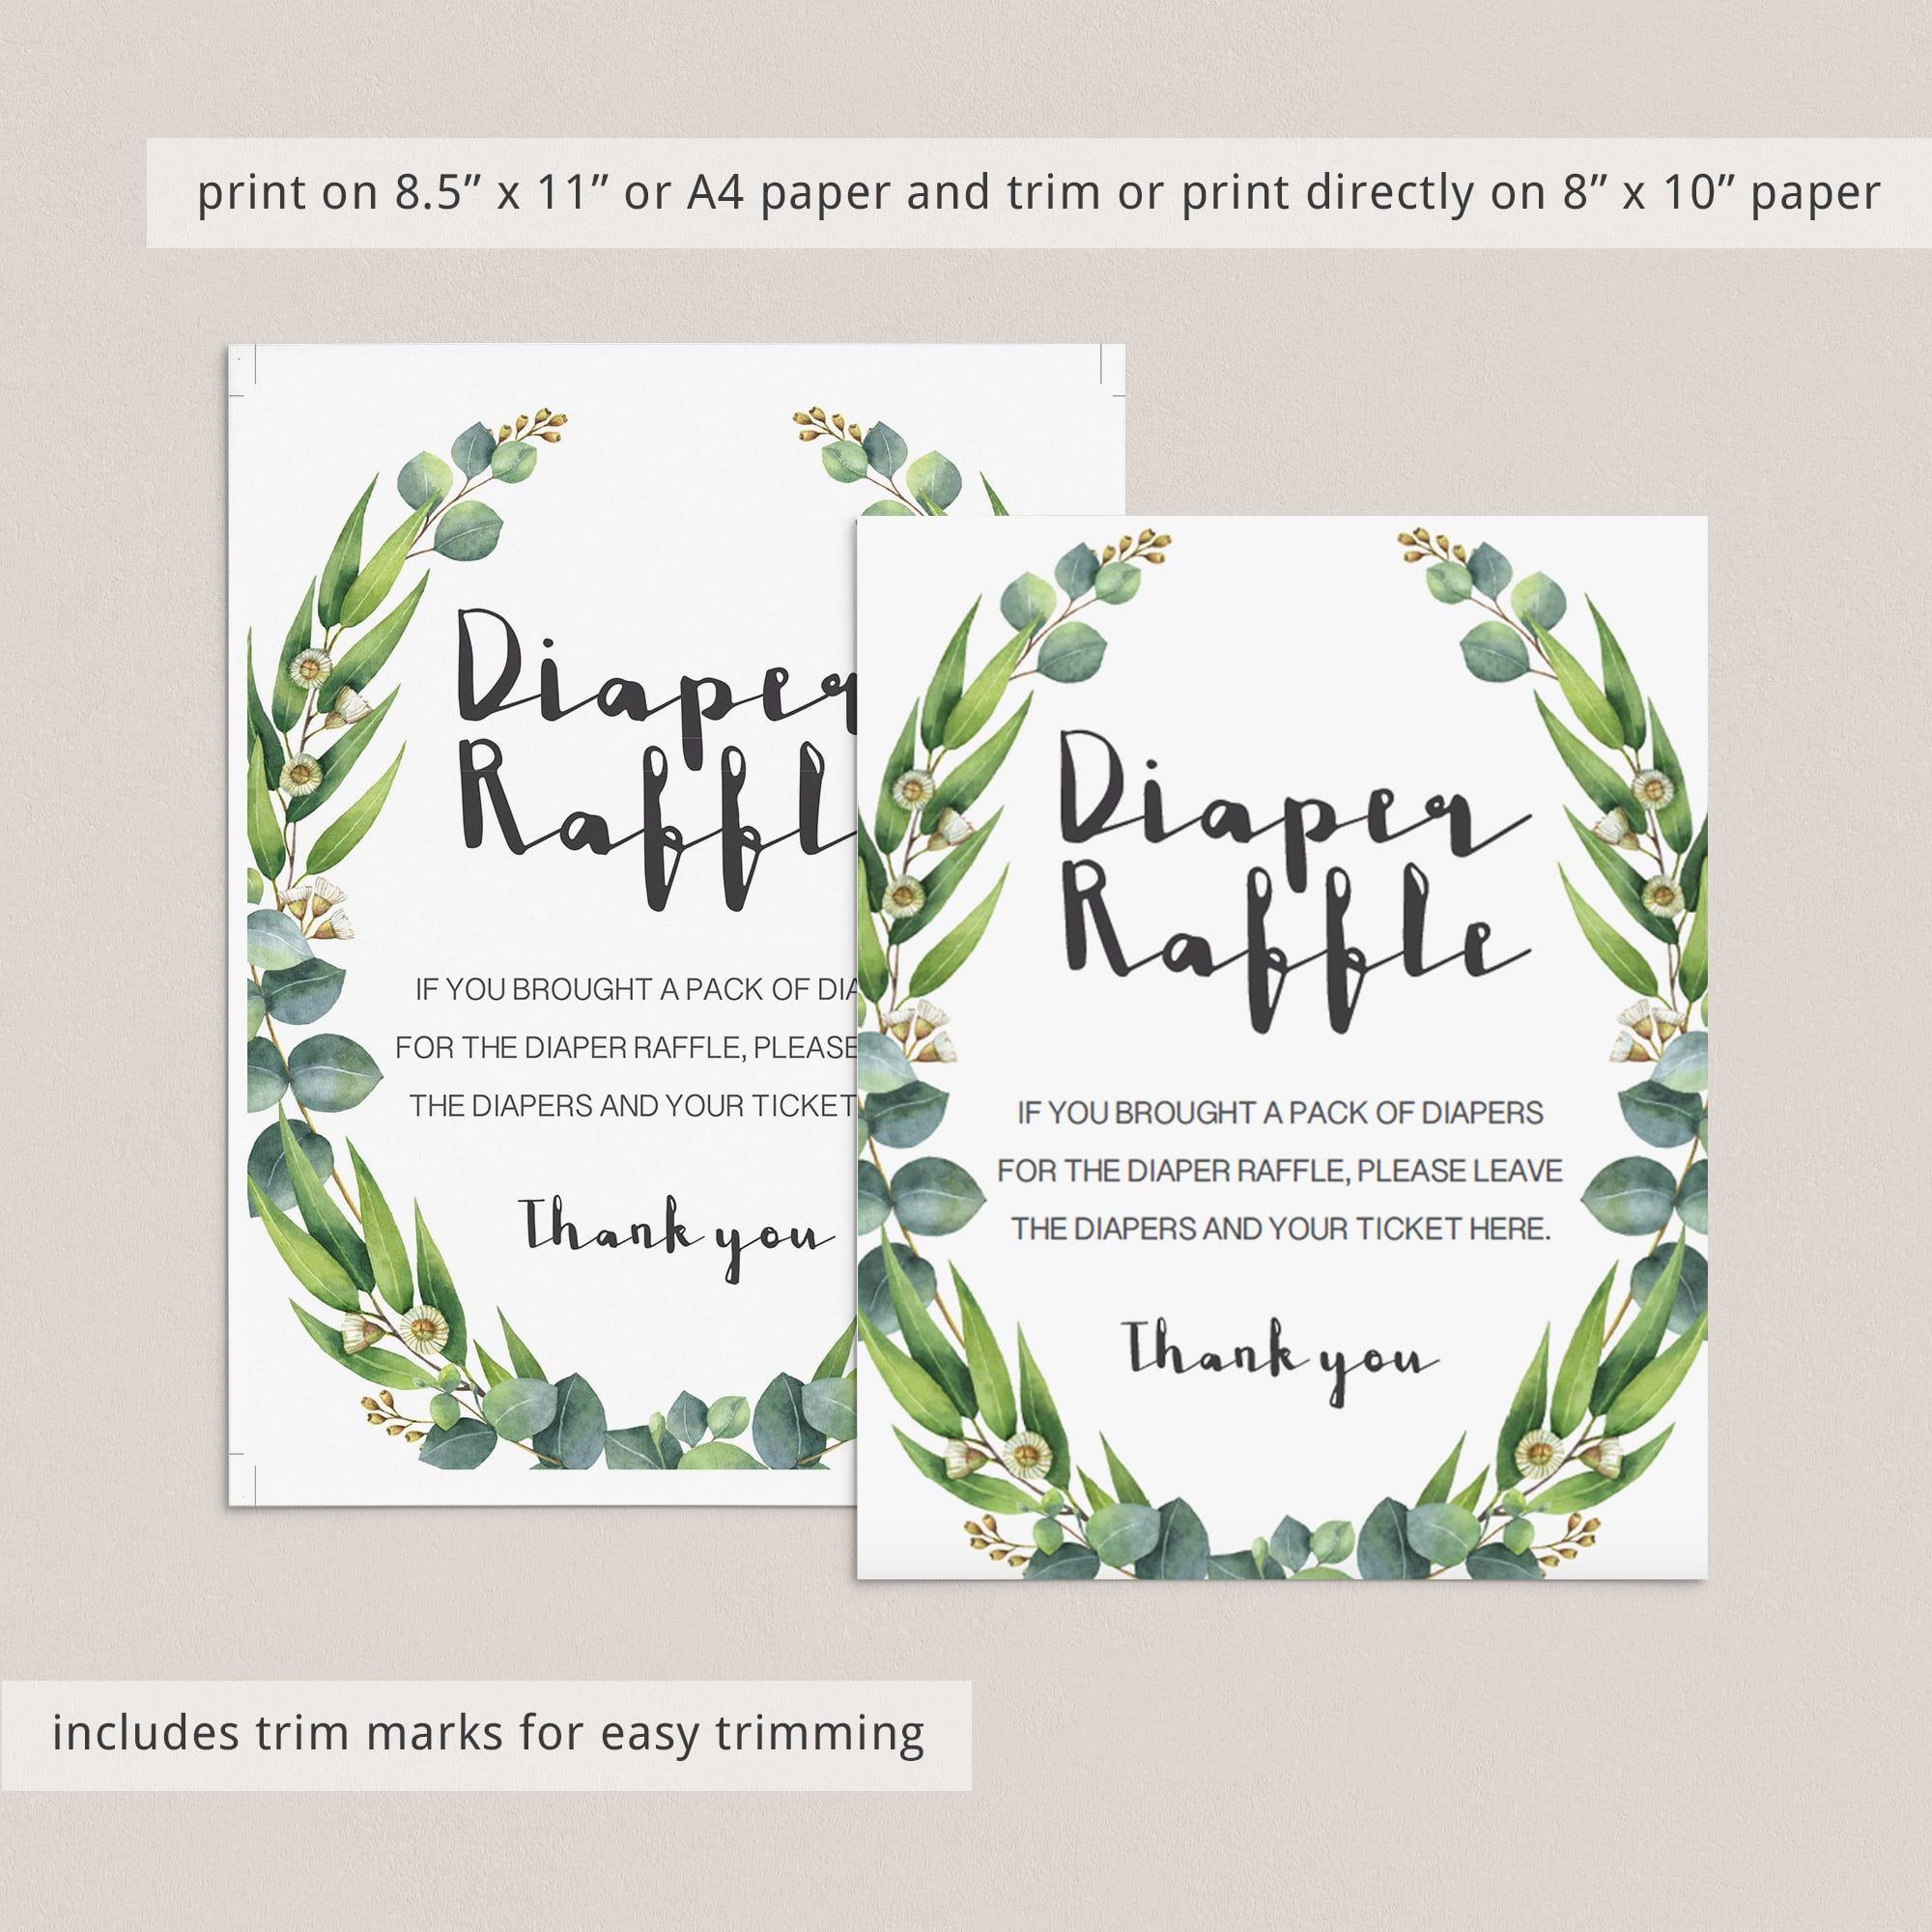 DIY diaper raffle game for botanical baby shower printable by LittleSizzle